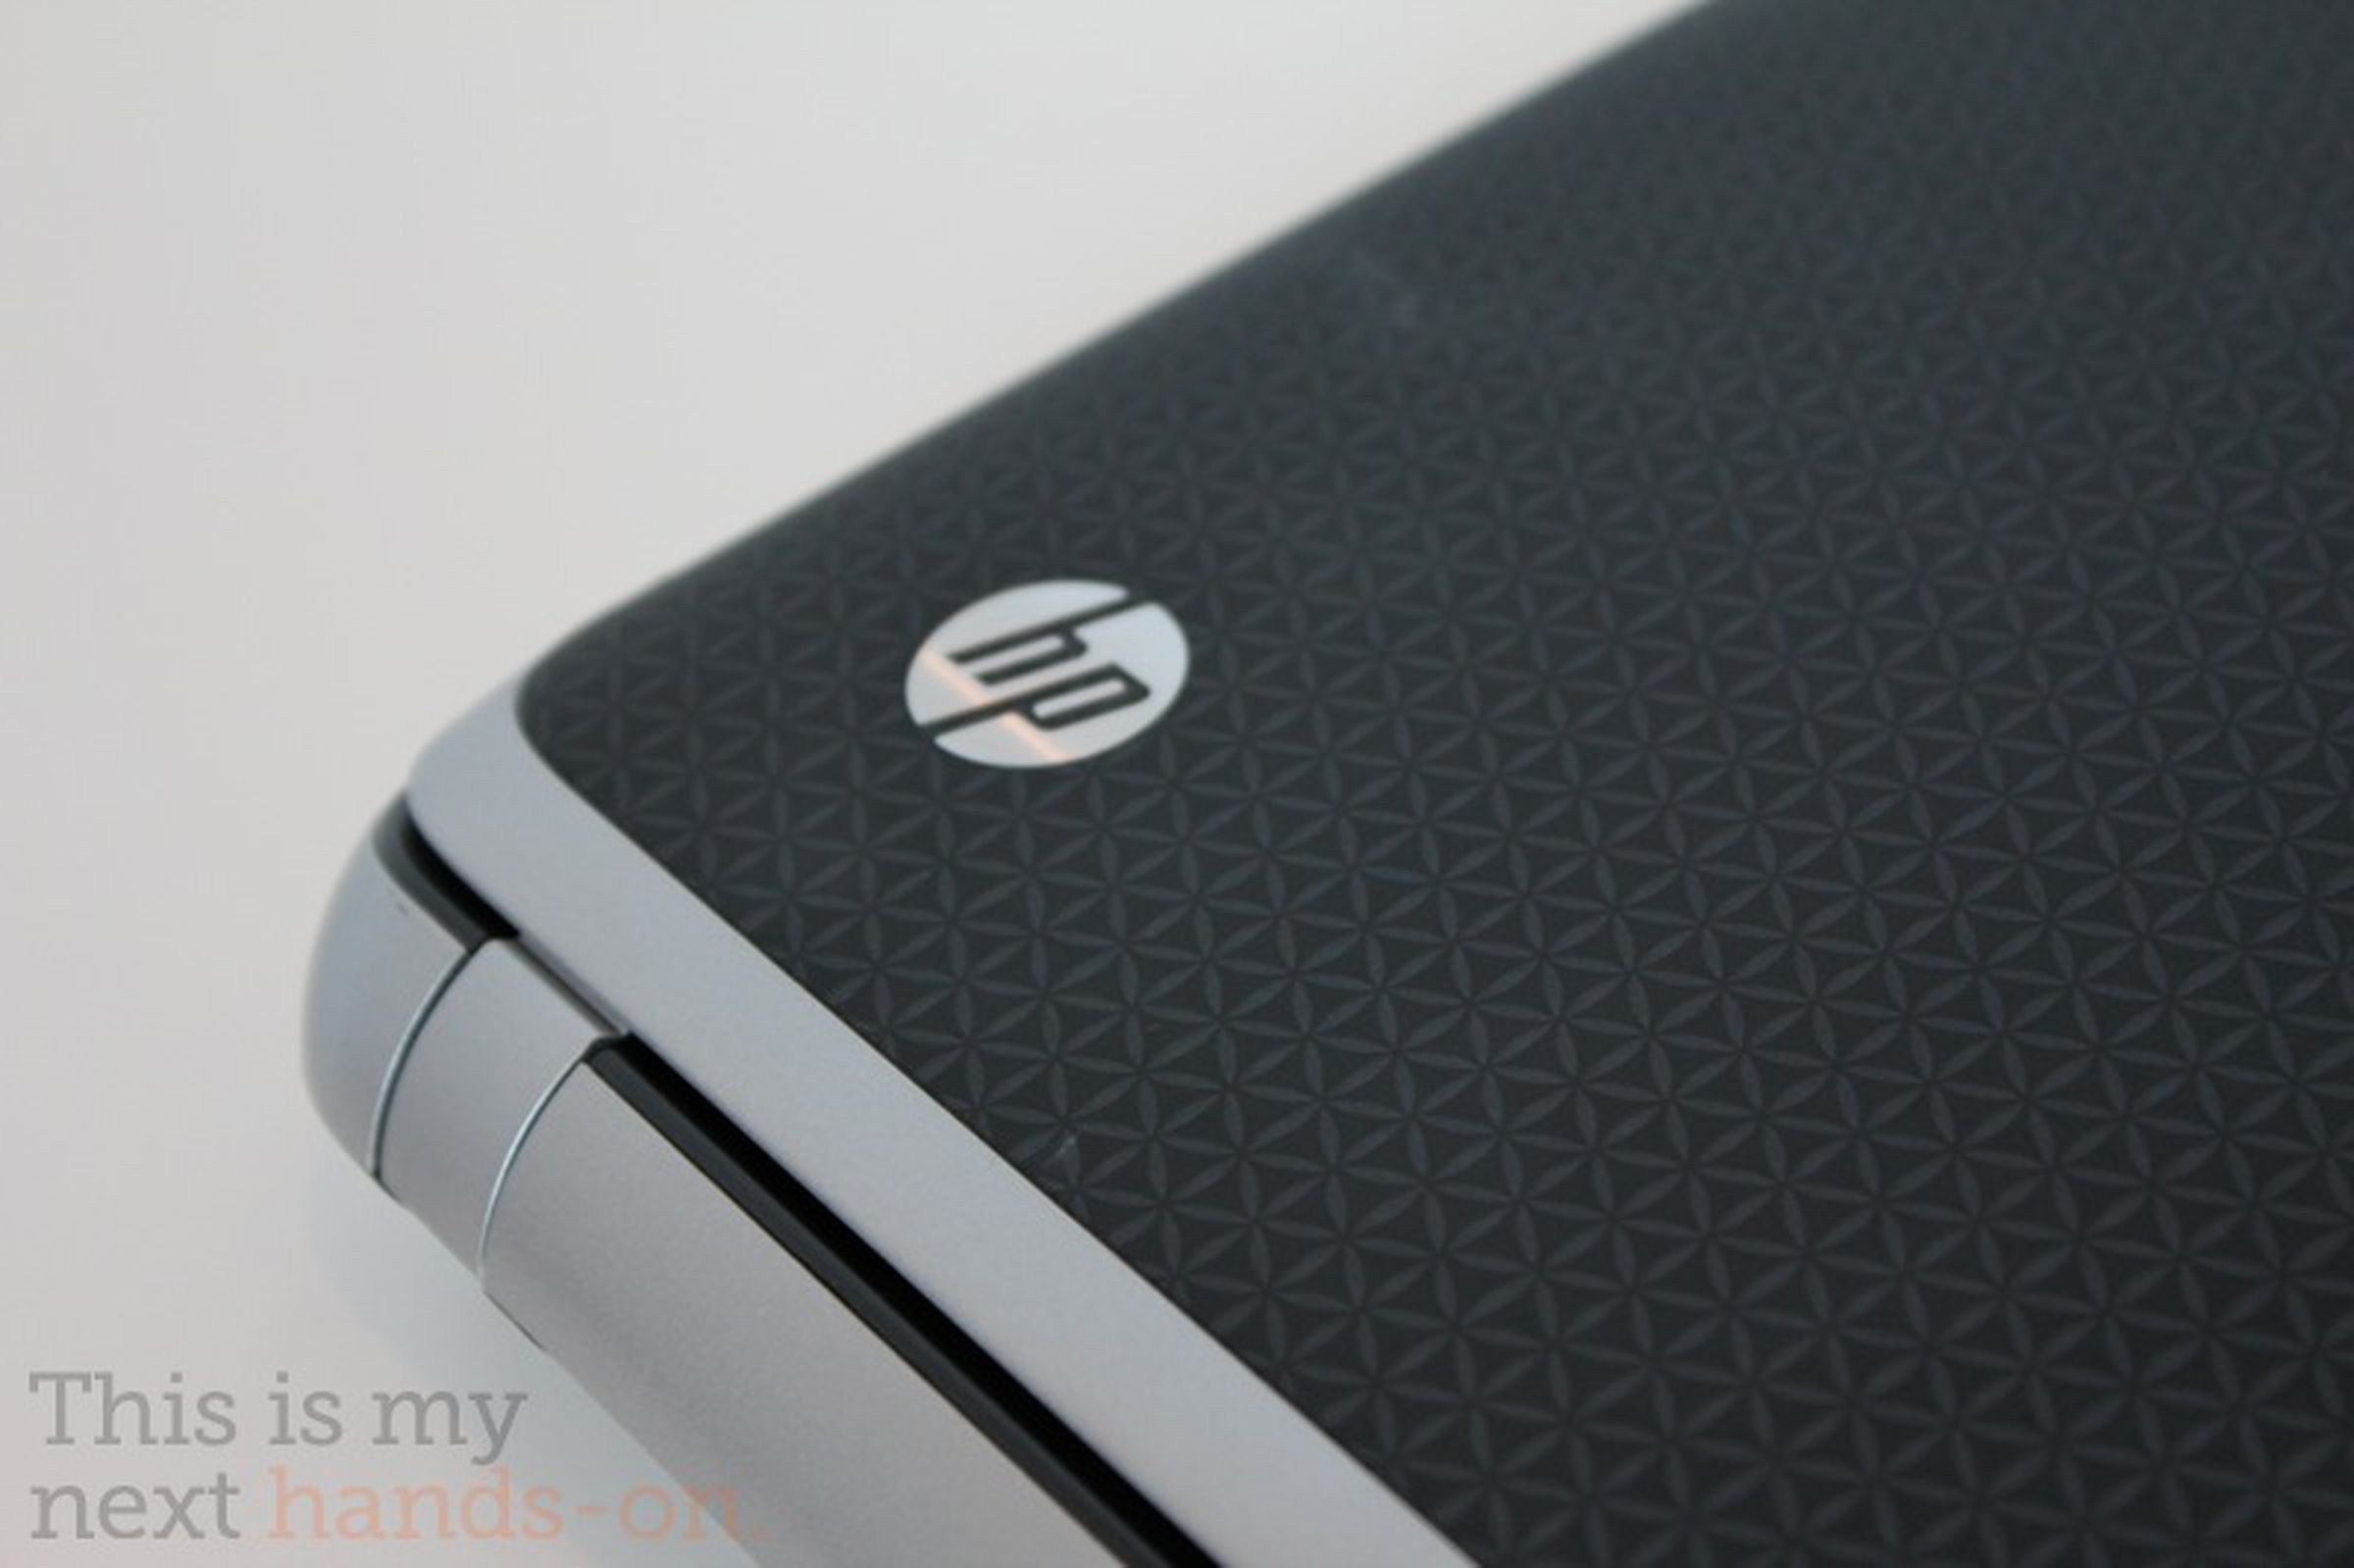 HP Pavilion dm1 refreshed — hands on photos